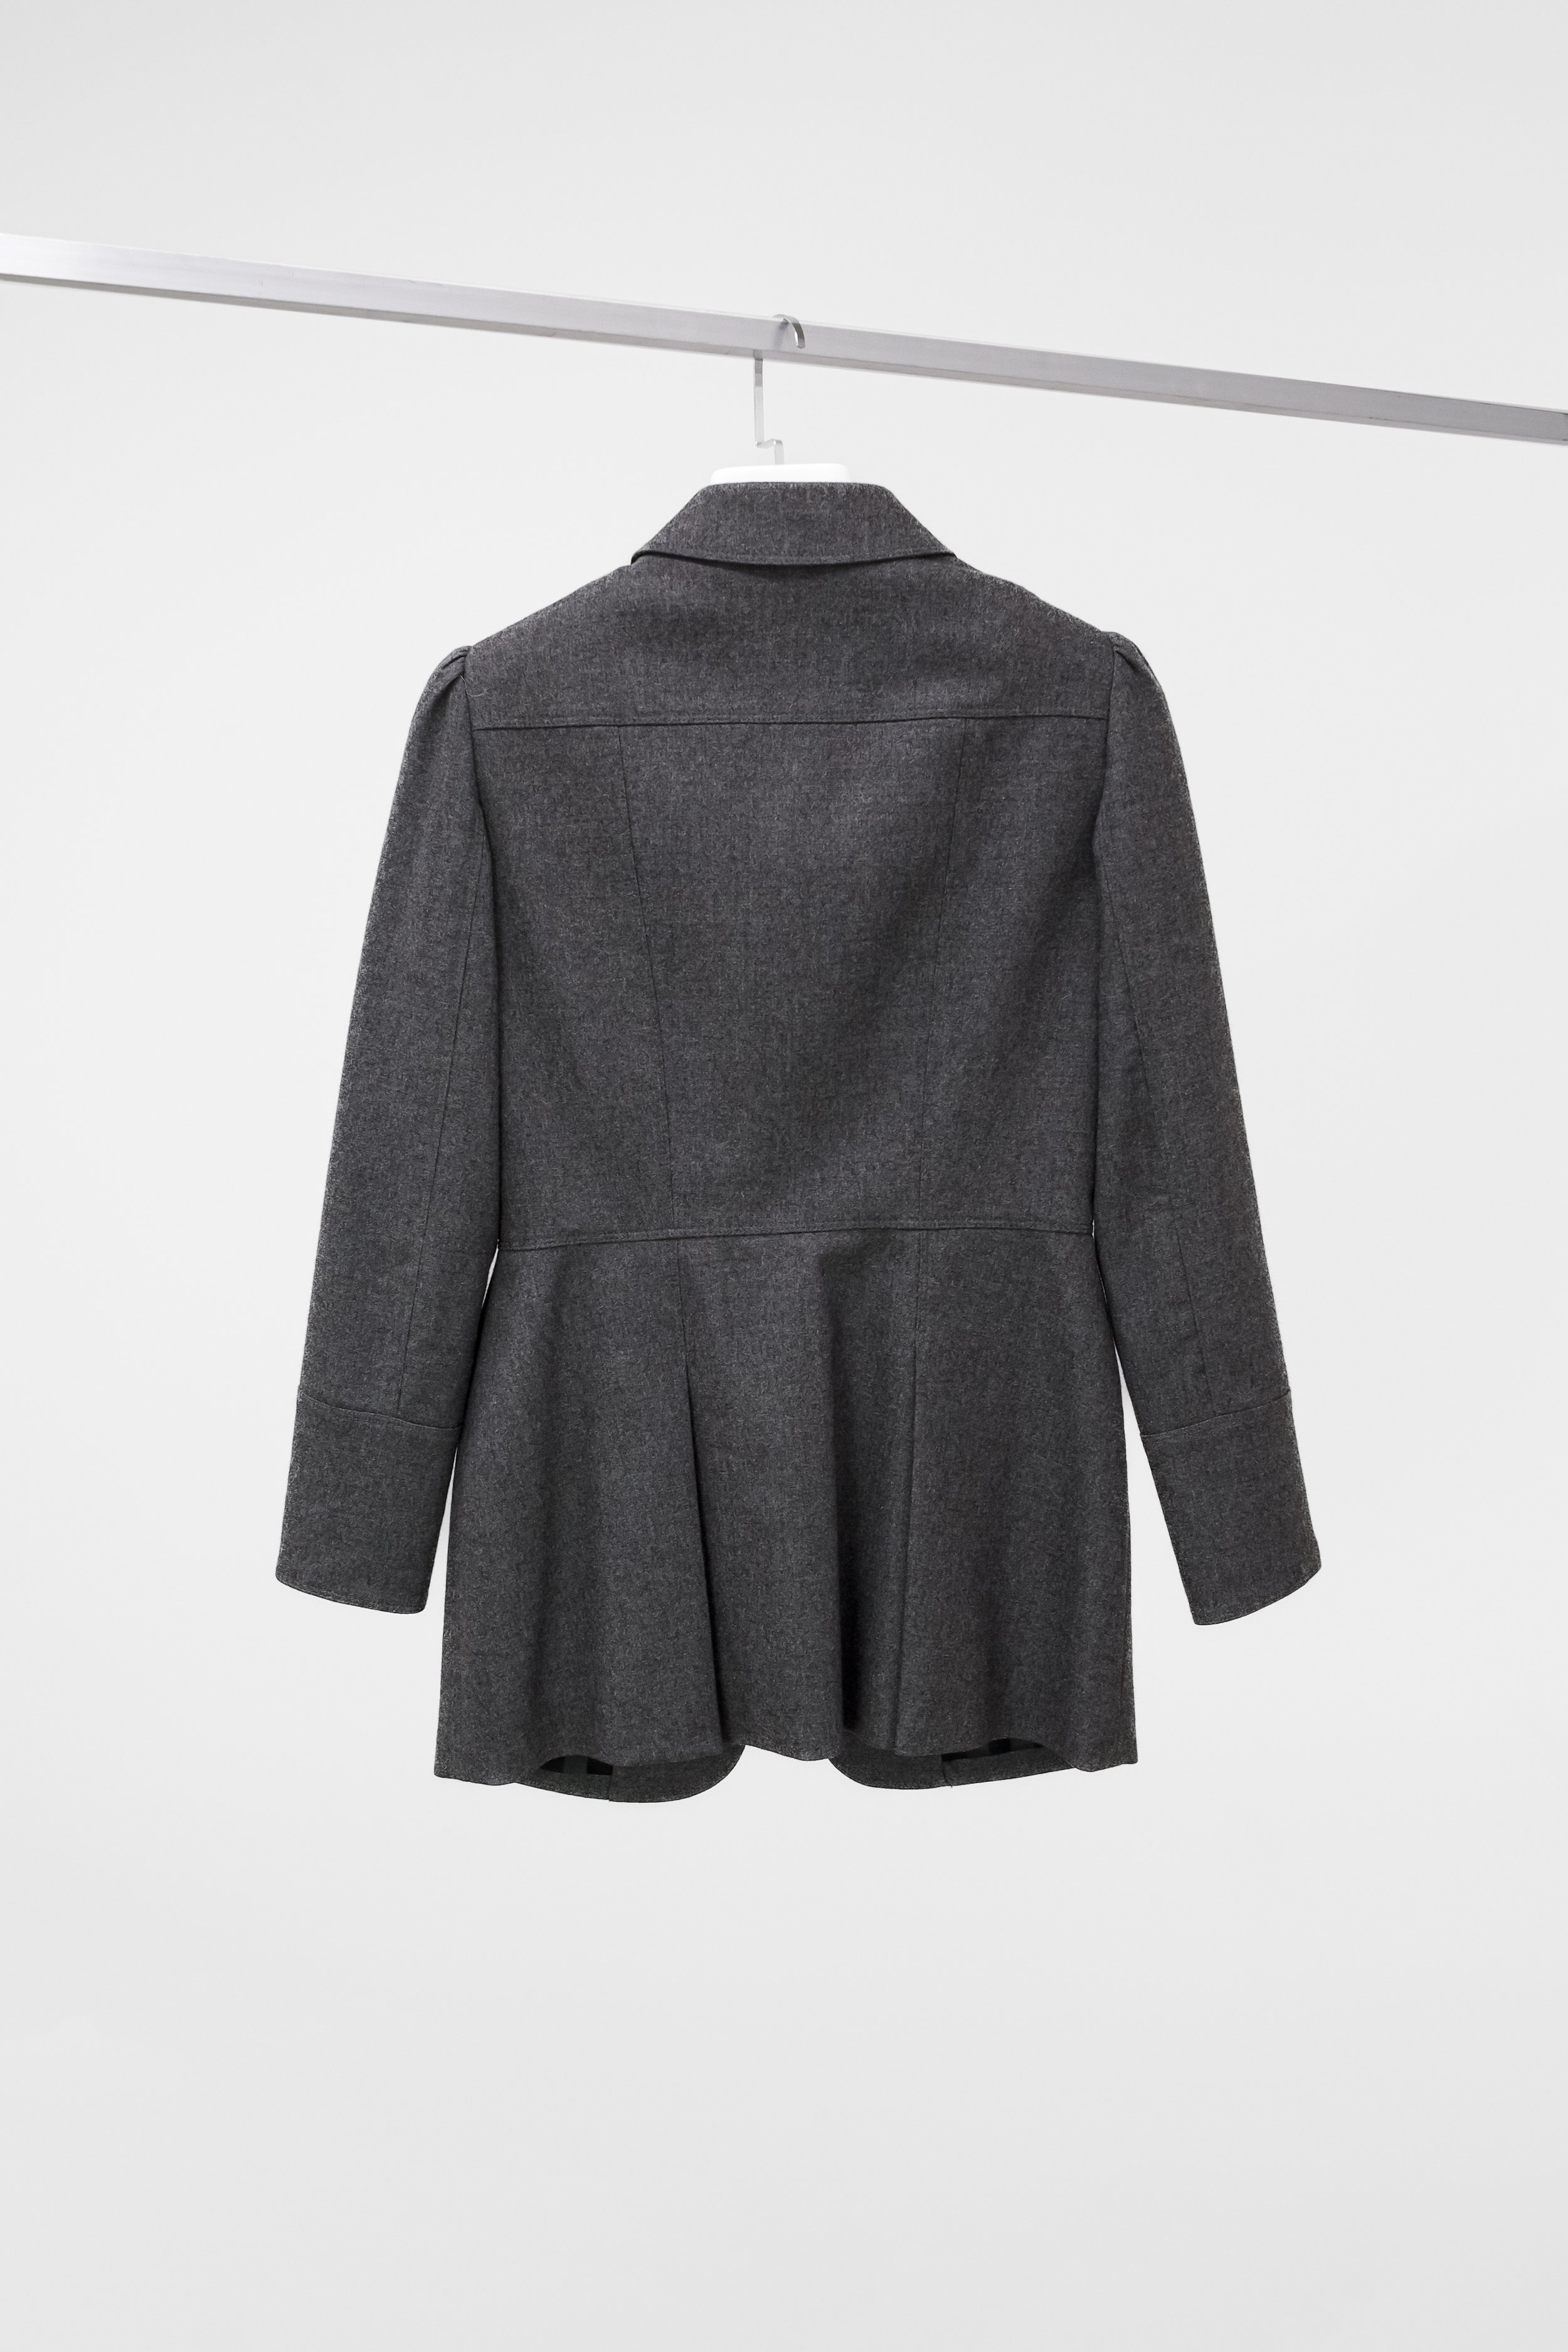 Burberry Grey Wool Coat — BLOGGER ARMOIRE